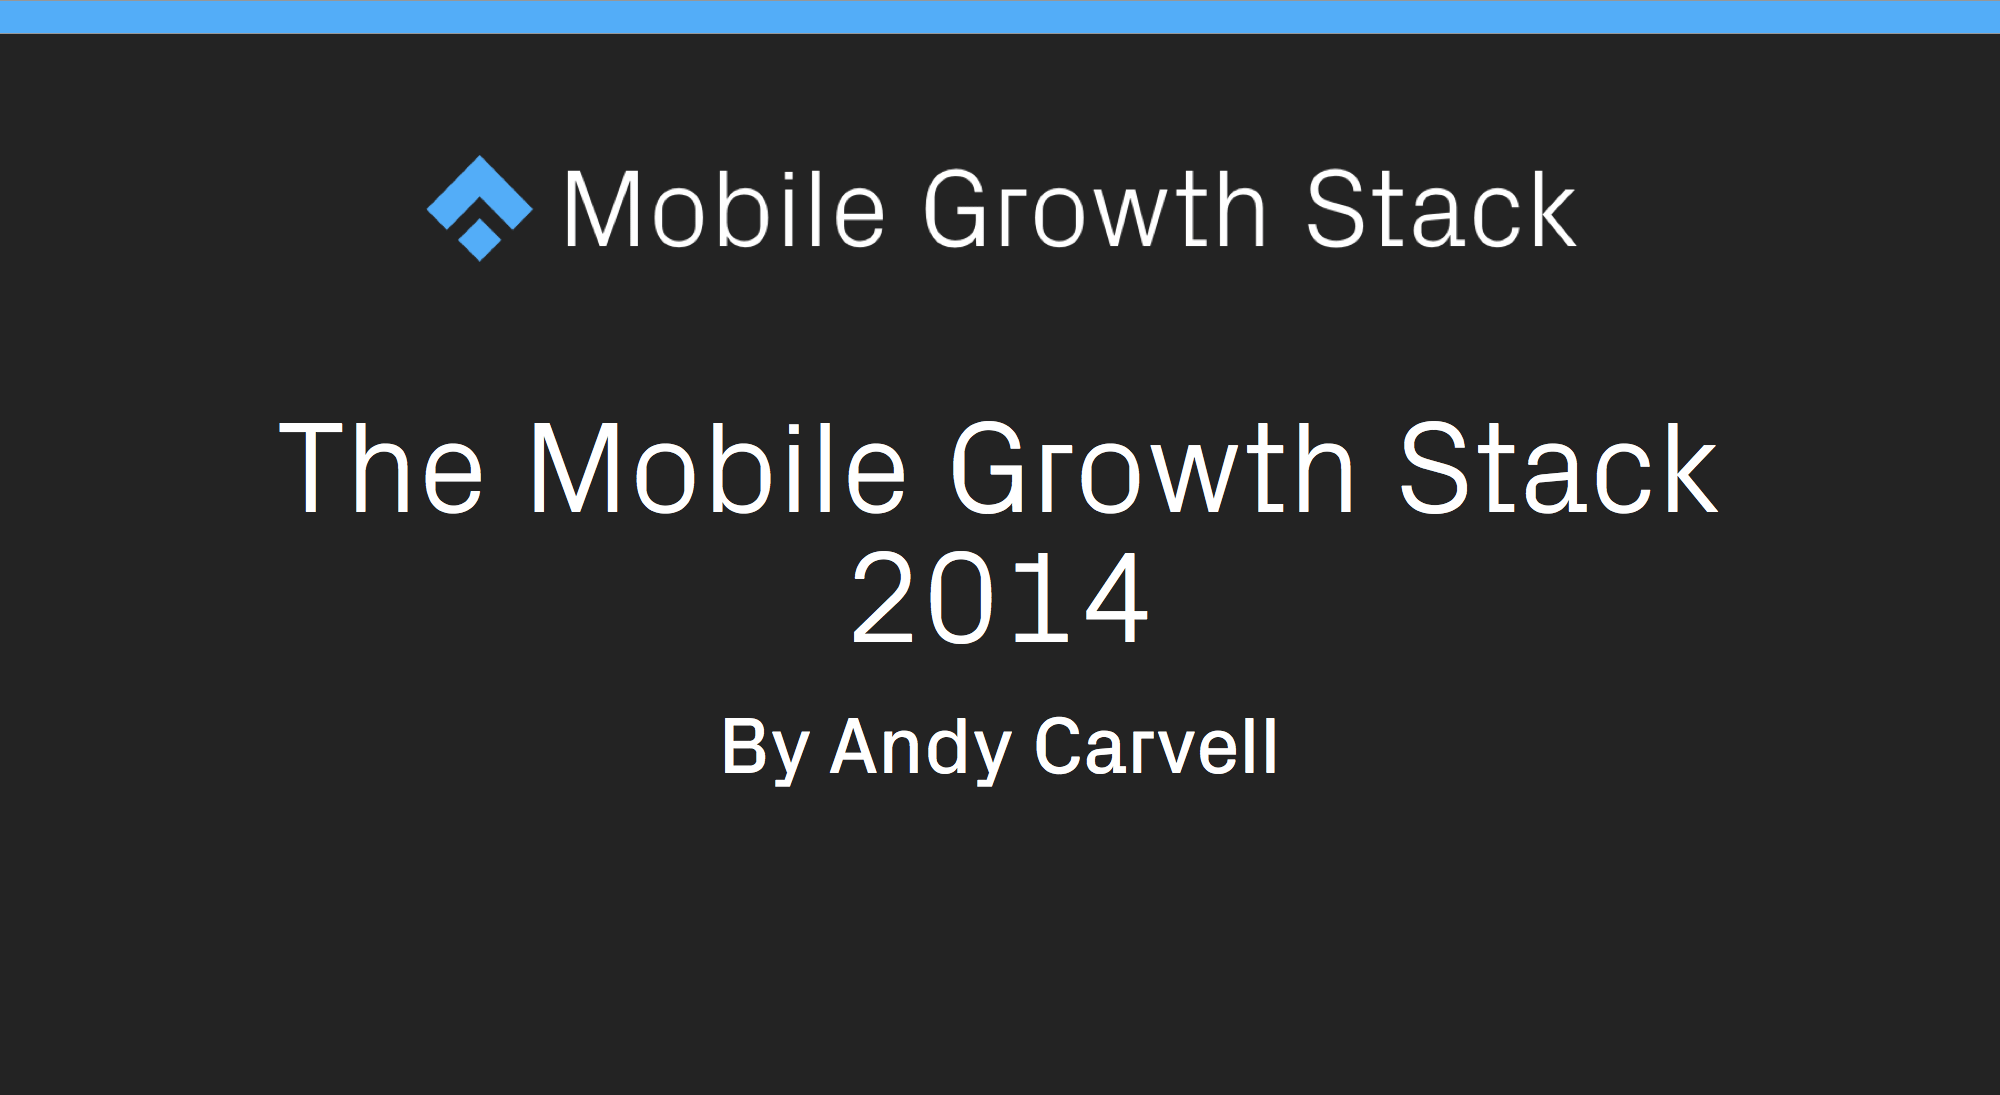 The Mobile Growth Stack 